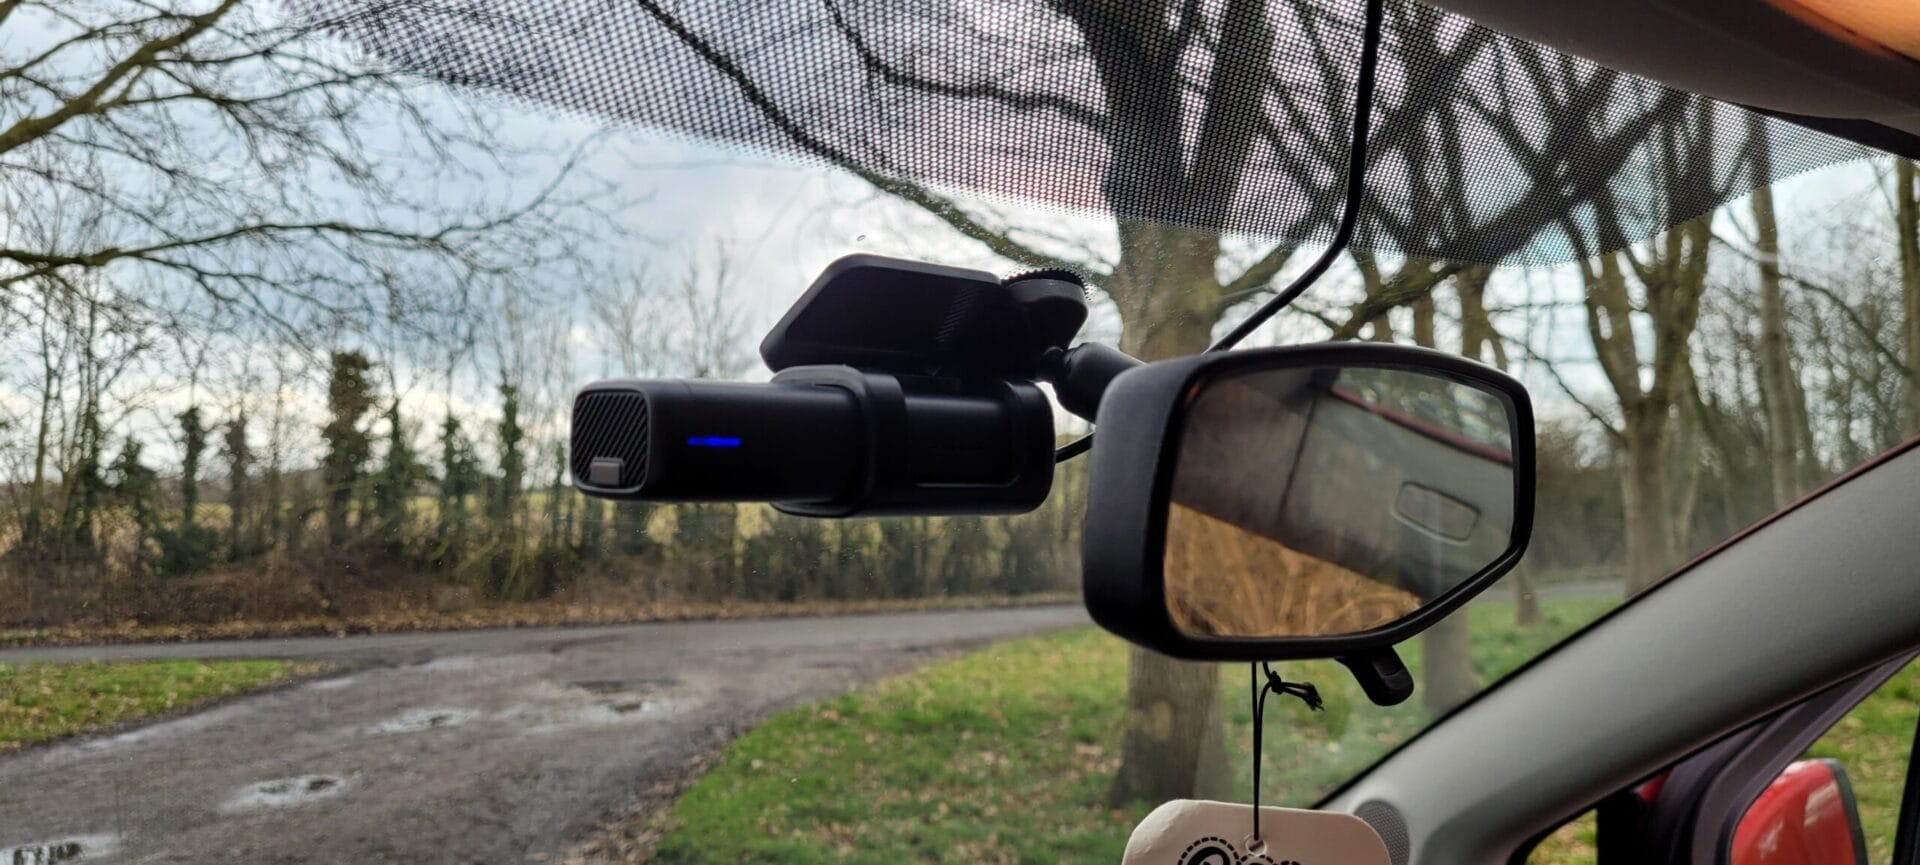 Image shows the dashcam installed behind the mirror.